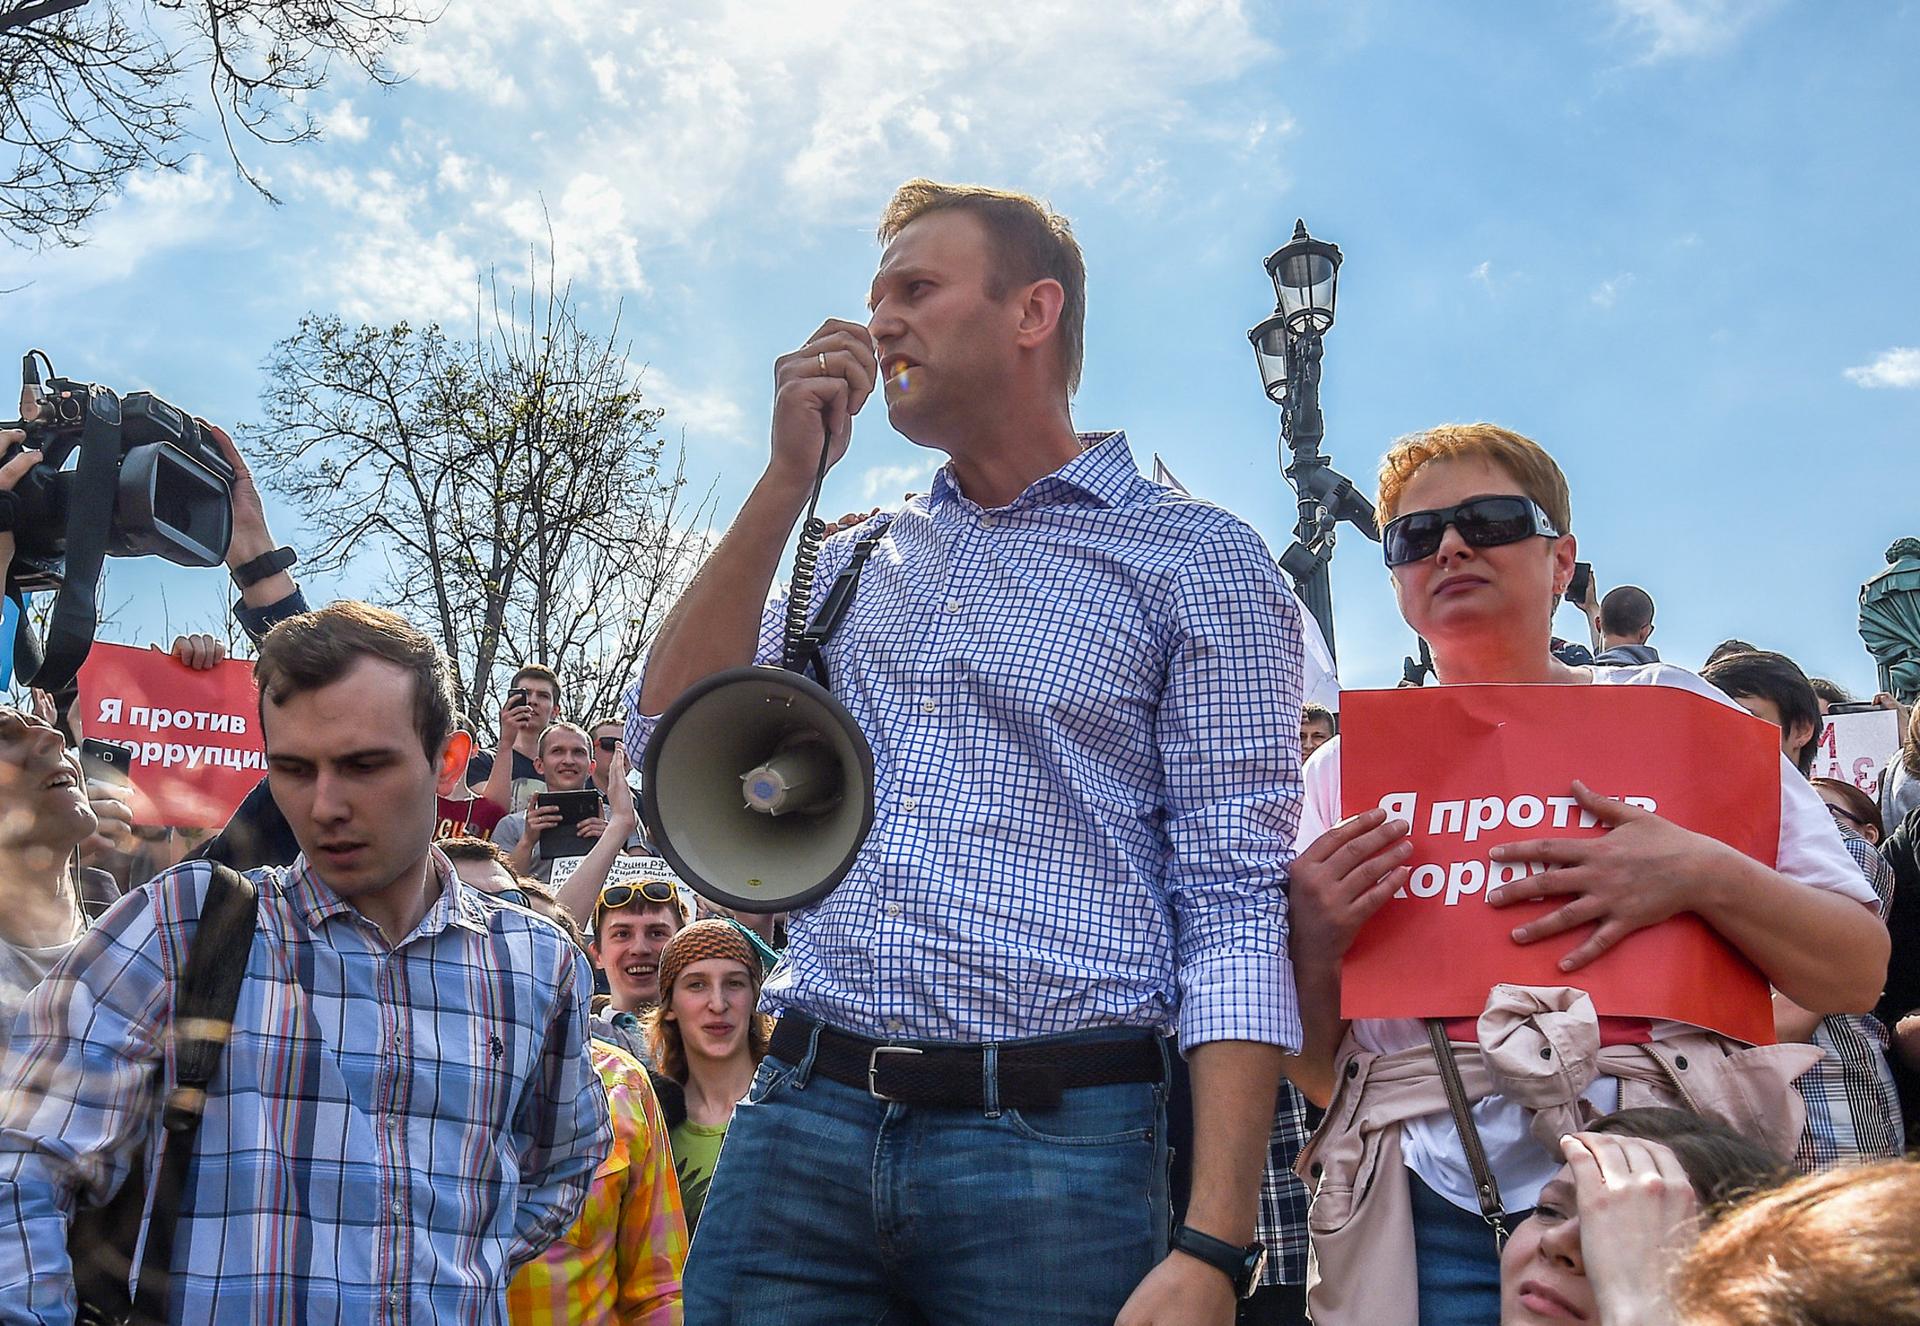 Russian opposition leader Alexei Navalny, center, attends a protest rally ahead of President Vladimir Putin's inauguration ceremony, in Moscow, May 5, 2018.